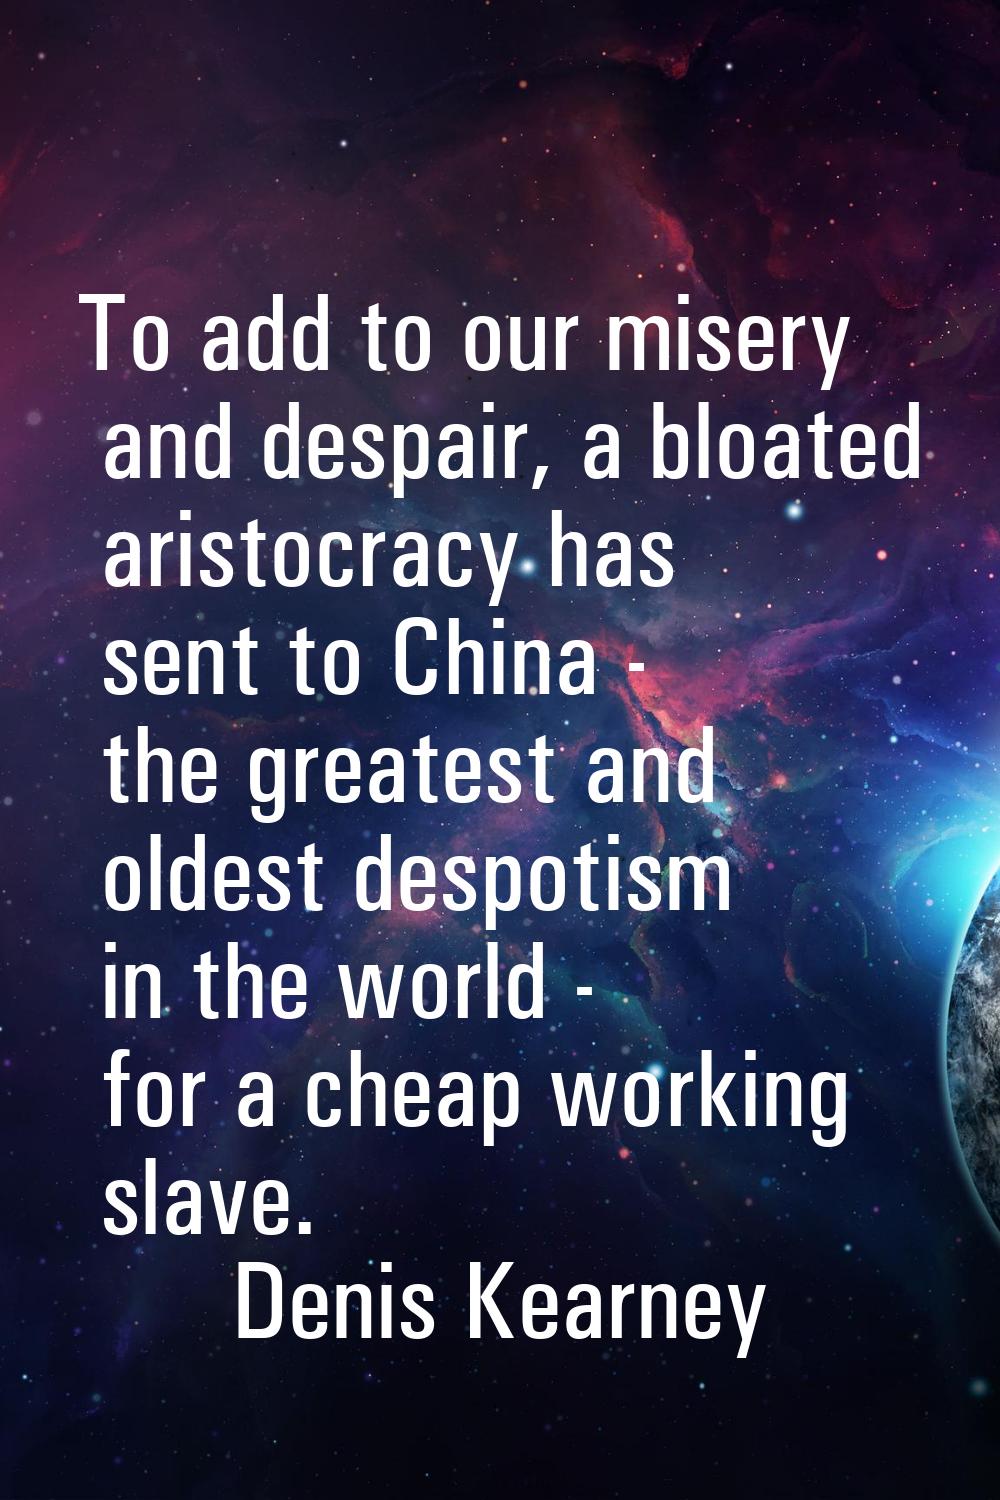 To add to our misery and despair, a bloated aristocracy has sent to China - the greatest and oldest